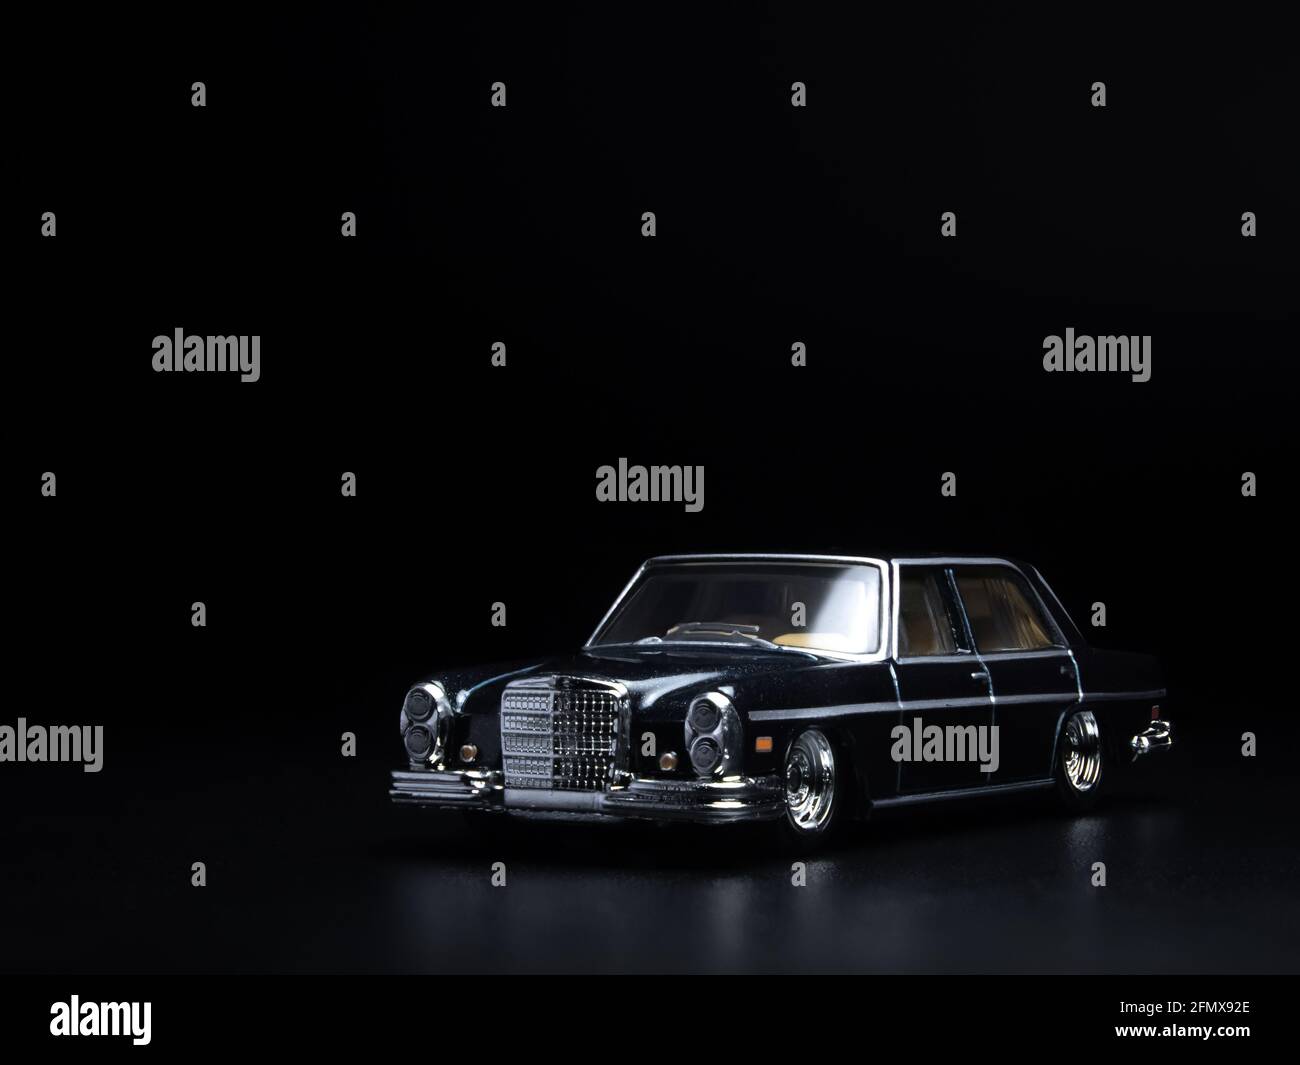 1/64 scale Hot Wheels black 1972 Mercedes-Benz 280 SEL 4.5 dieacst toy car  on a dark black background Stock Photo - Alamy